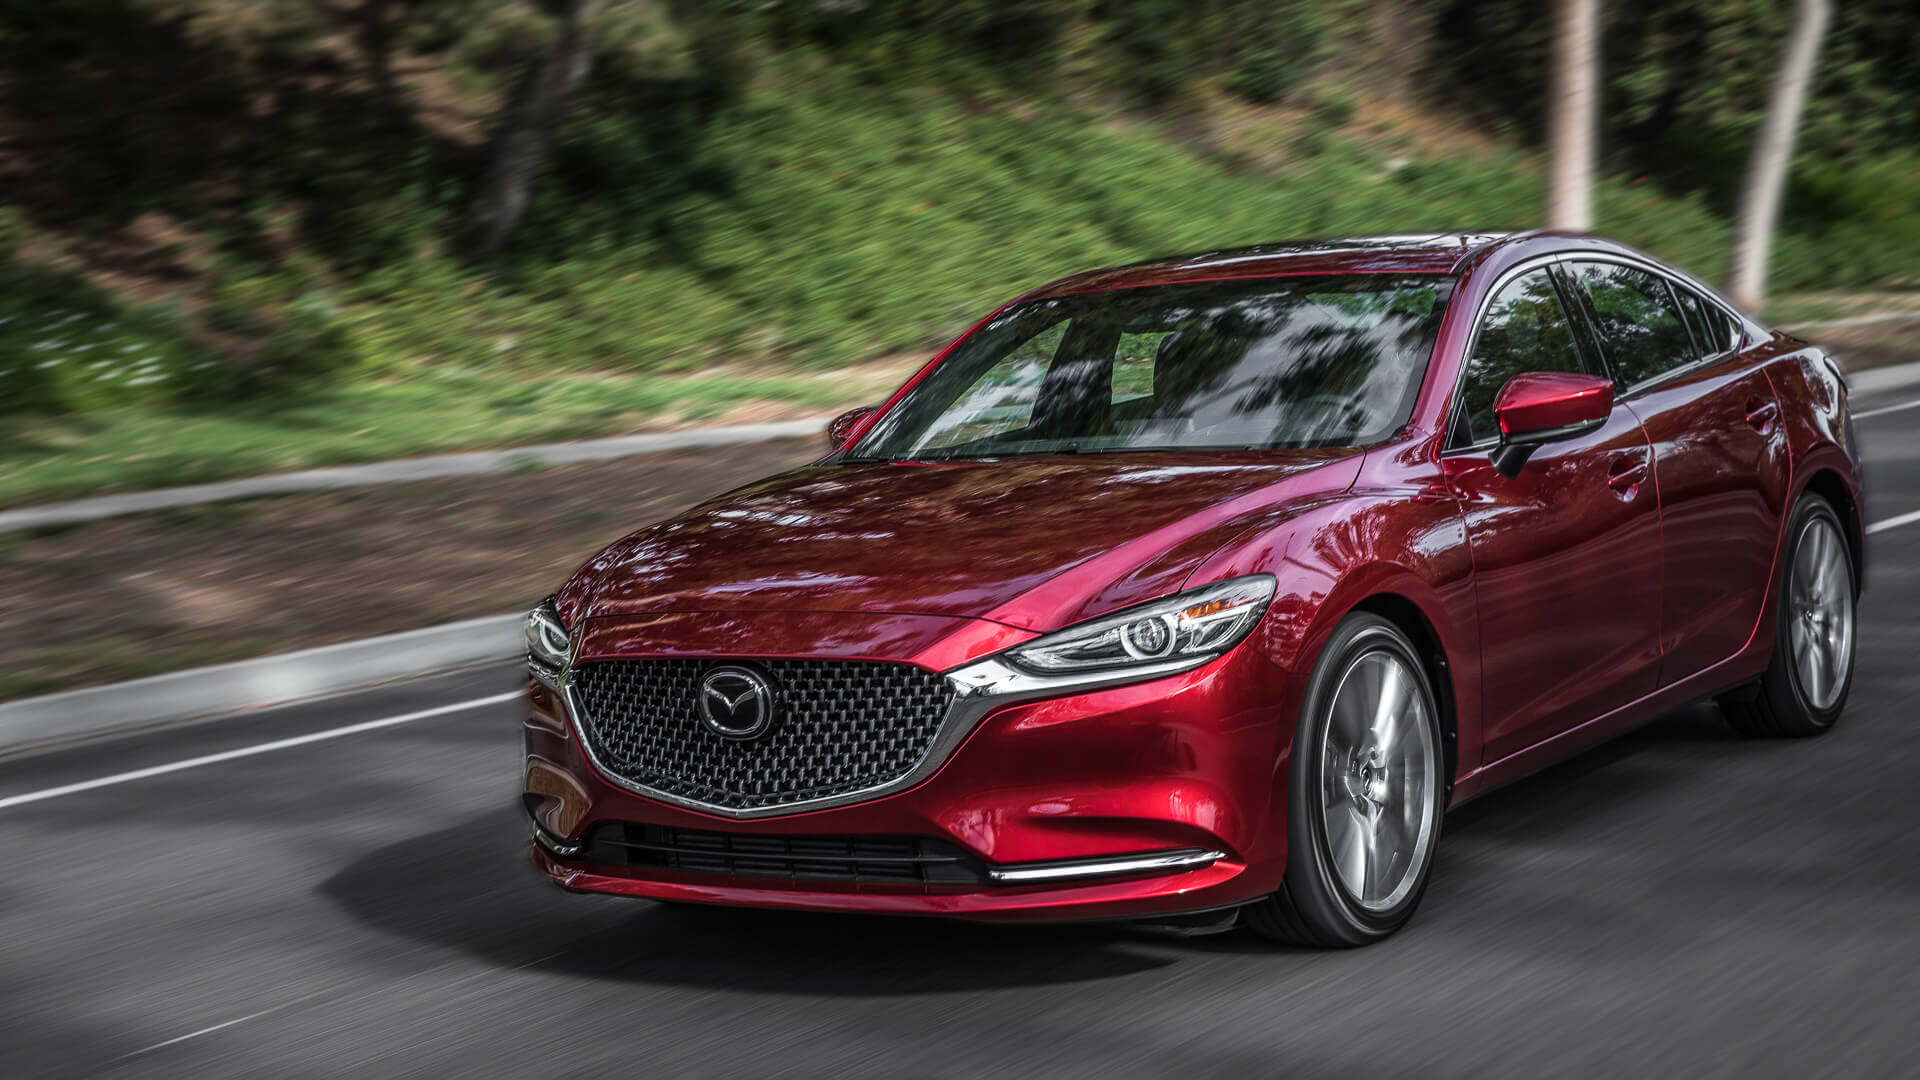 <ul> <li><strong>10-year cost to maintain:</strong> $12,700</li> </ul> <p>The predecessor to Mazda Motor Corp. was founded in 1920 in Hiroshima, Japan. The Mazda 6, however, dates back only to 2003.</p> <p>One of the top-selling cars in the crowded midsize sedan segment, the Mazda 6 is among the priciest to maintain in the Mazda line. The brand's average car requires just $7,500 for upkeep over a decade compared to $12,700 for the Mazda 6.</p>